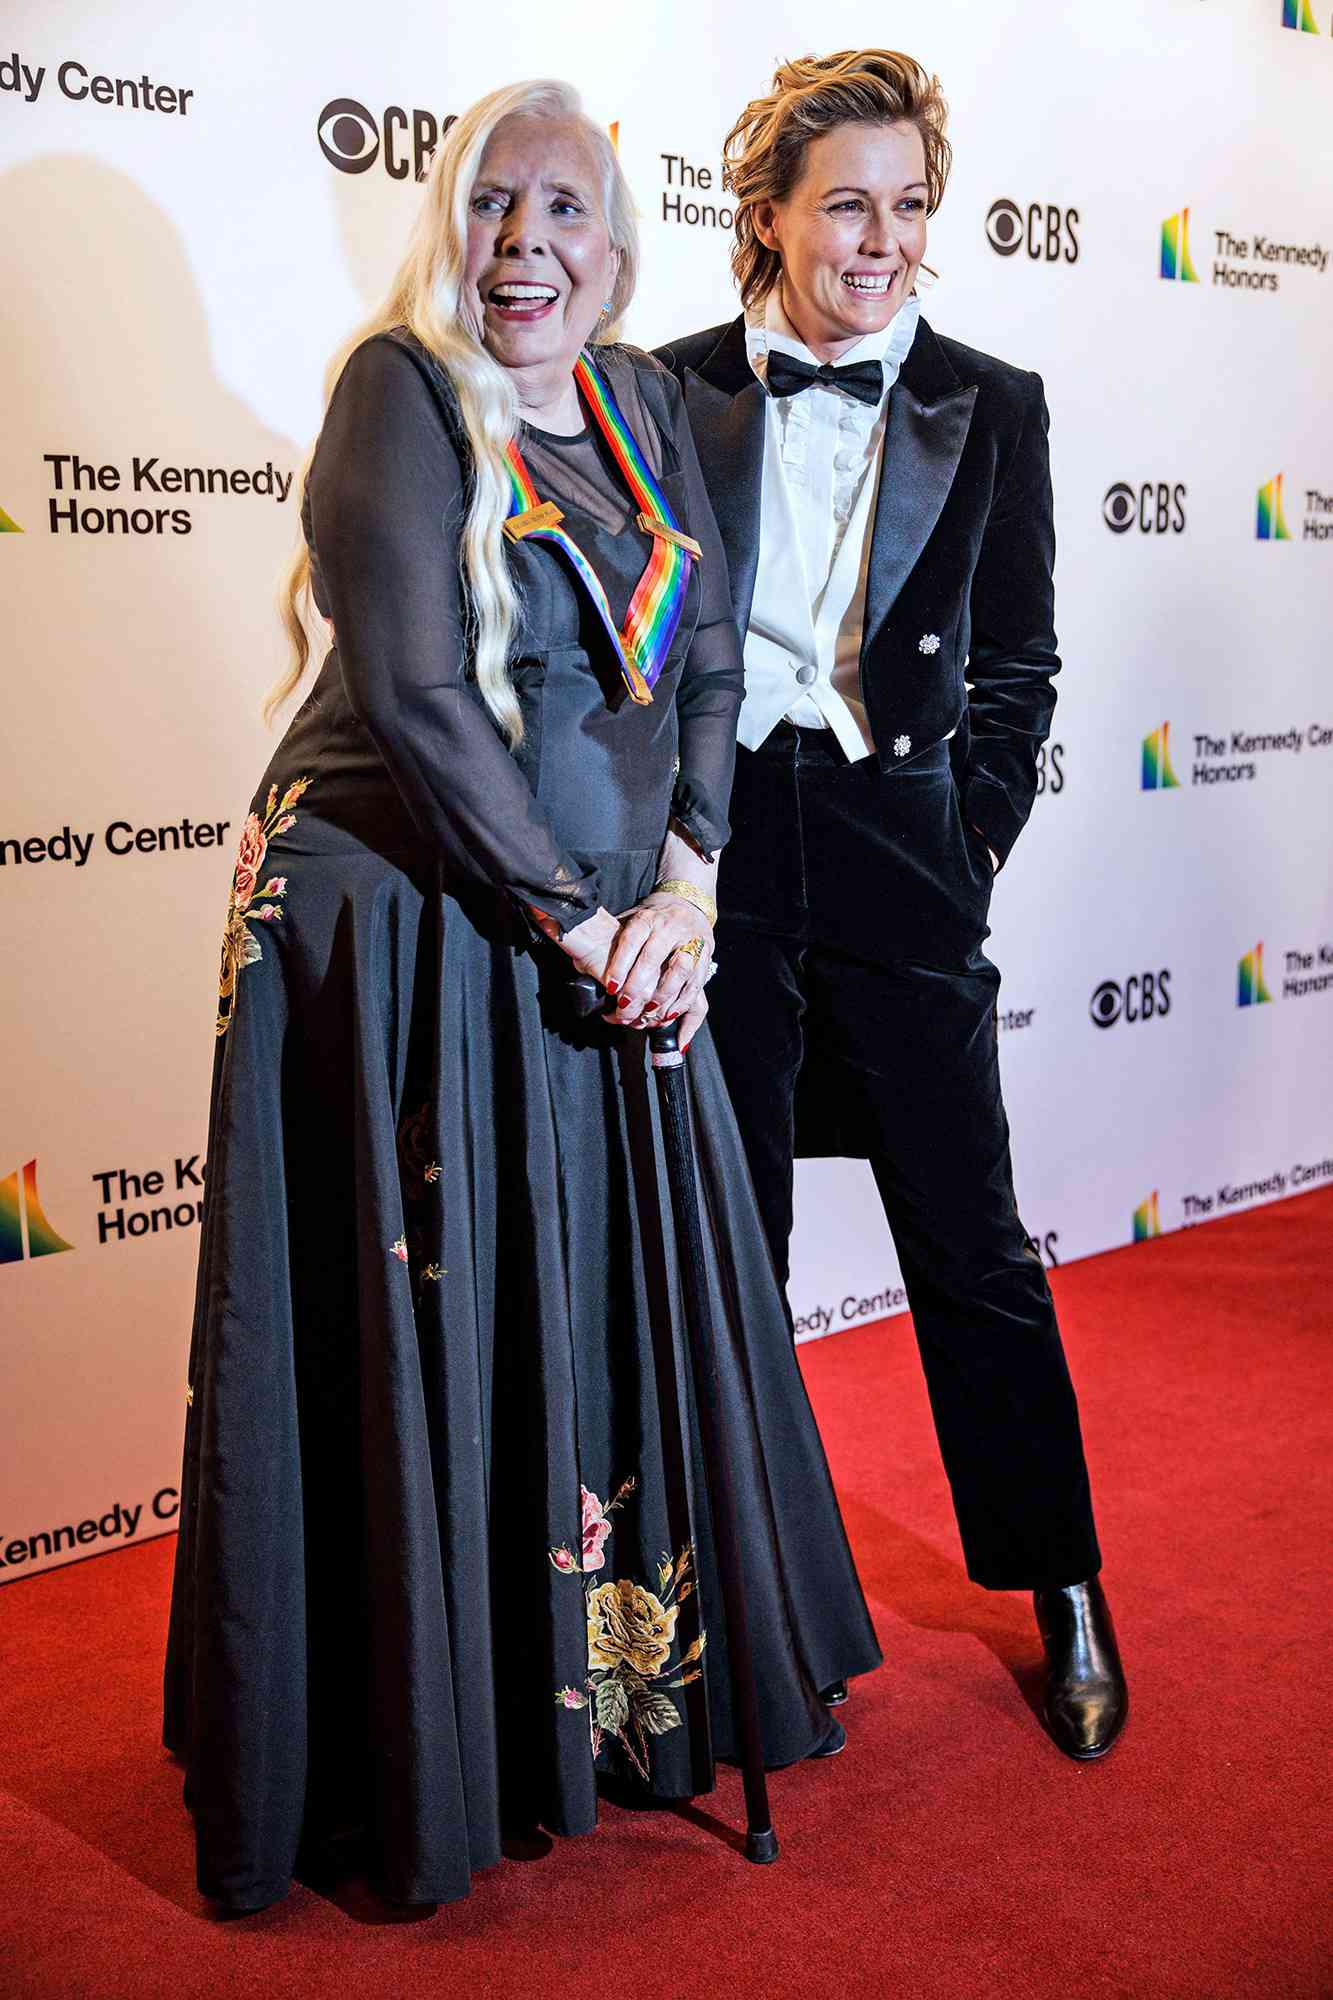 Honoree US singer Joni Mitchell (L) and US singer Brandi Carlile attend the 44th Kennedy Center Honors at the Kennedy Center in Washington, DC, on December 5, 2021. (Photo by Samuel Corum / AFP) (Photo by SAMUEL CORUM/AFP via Getty Images)